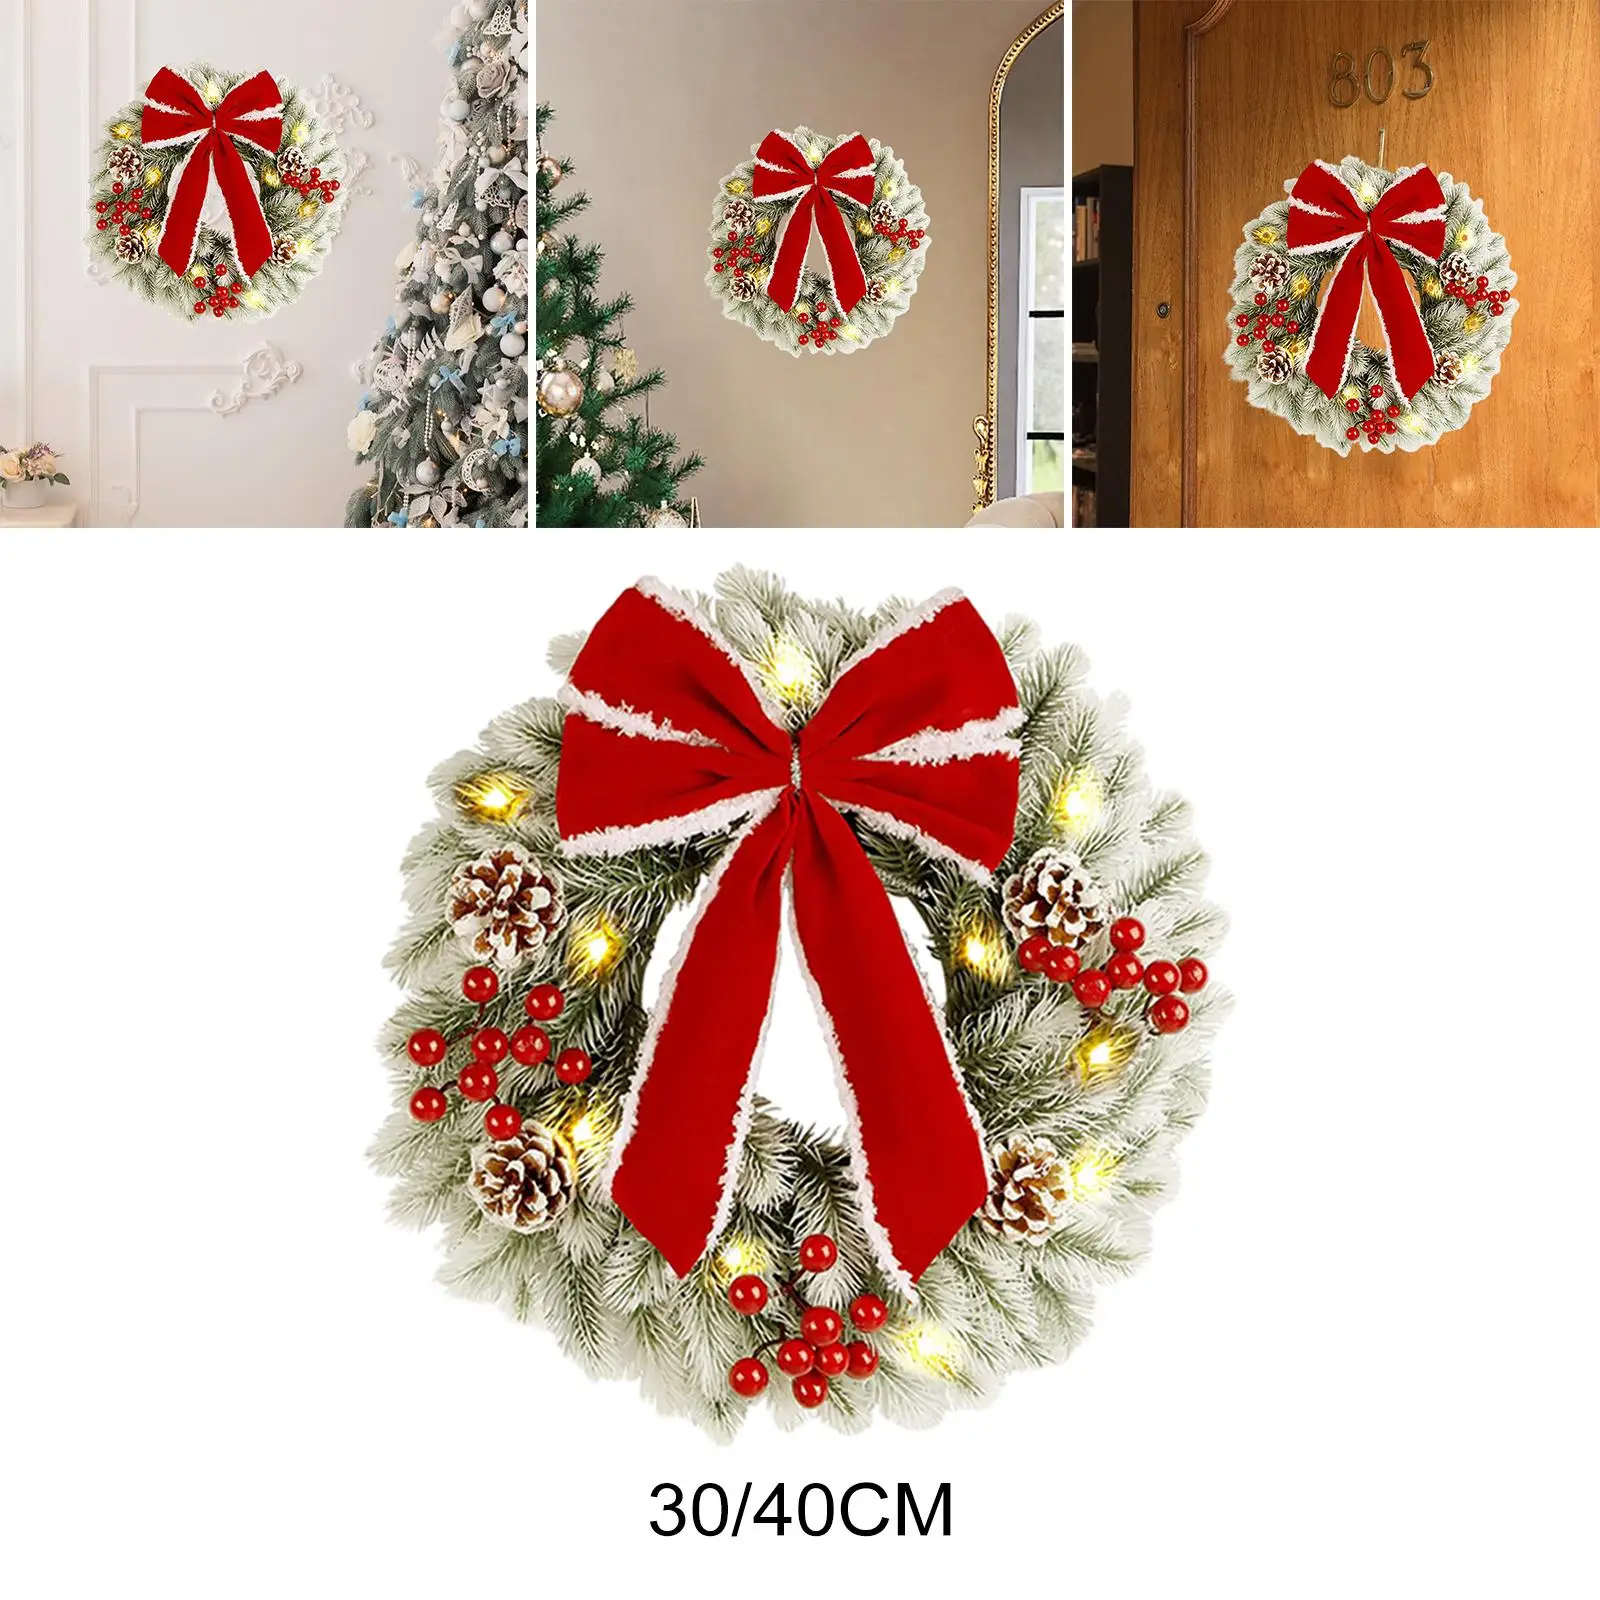 Christmas Wreath with String Light Handcrafted Decorative Front Door Wreath Holiday Garland for Wall Porch Office Party Ornament